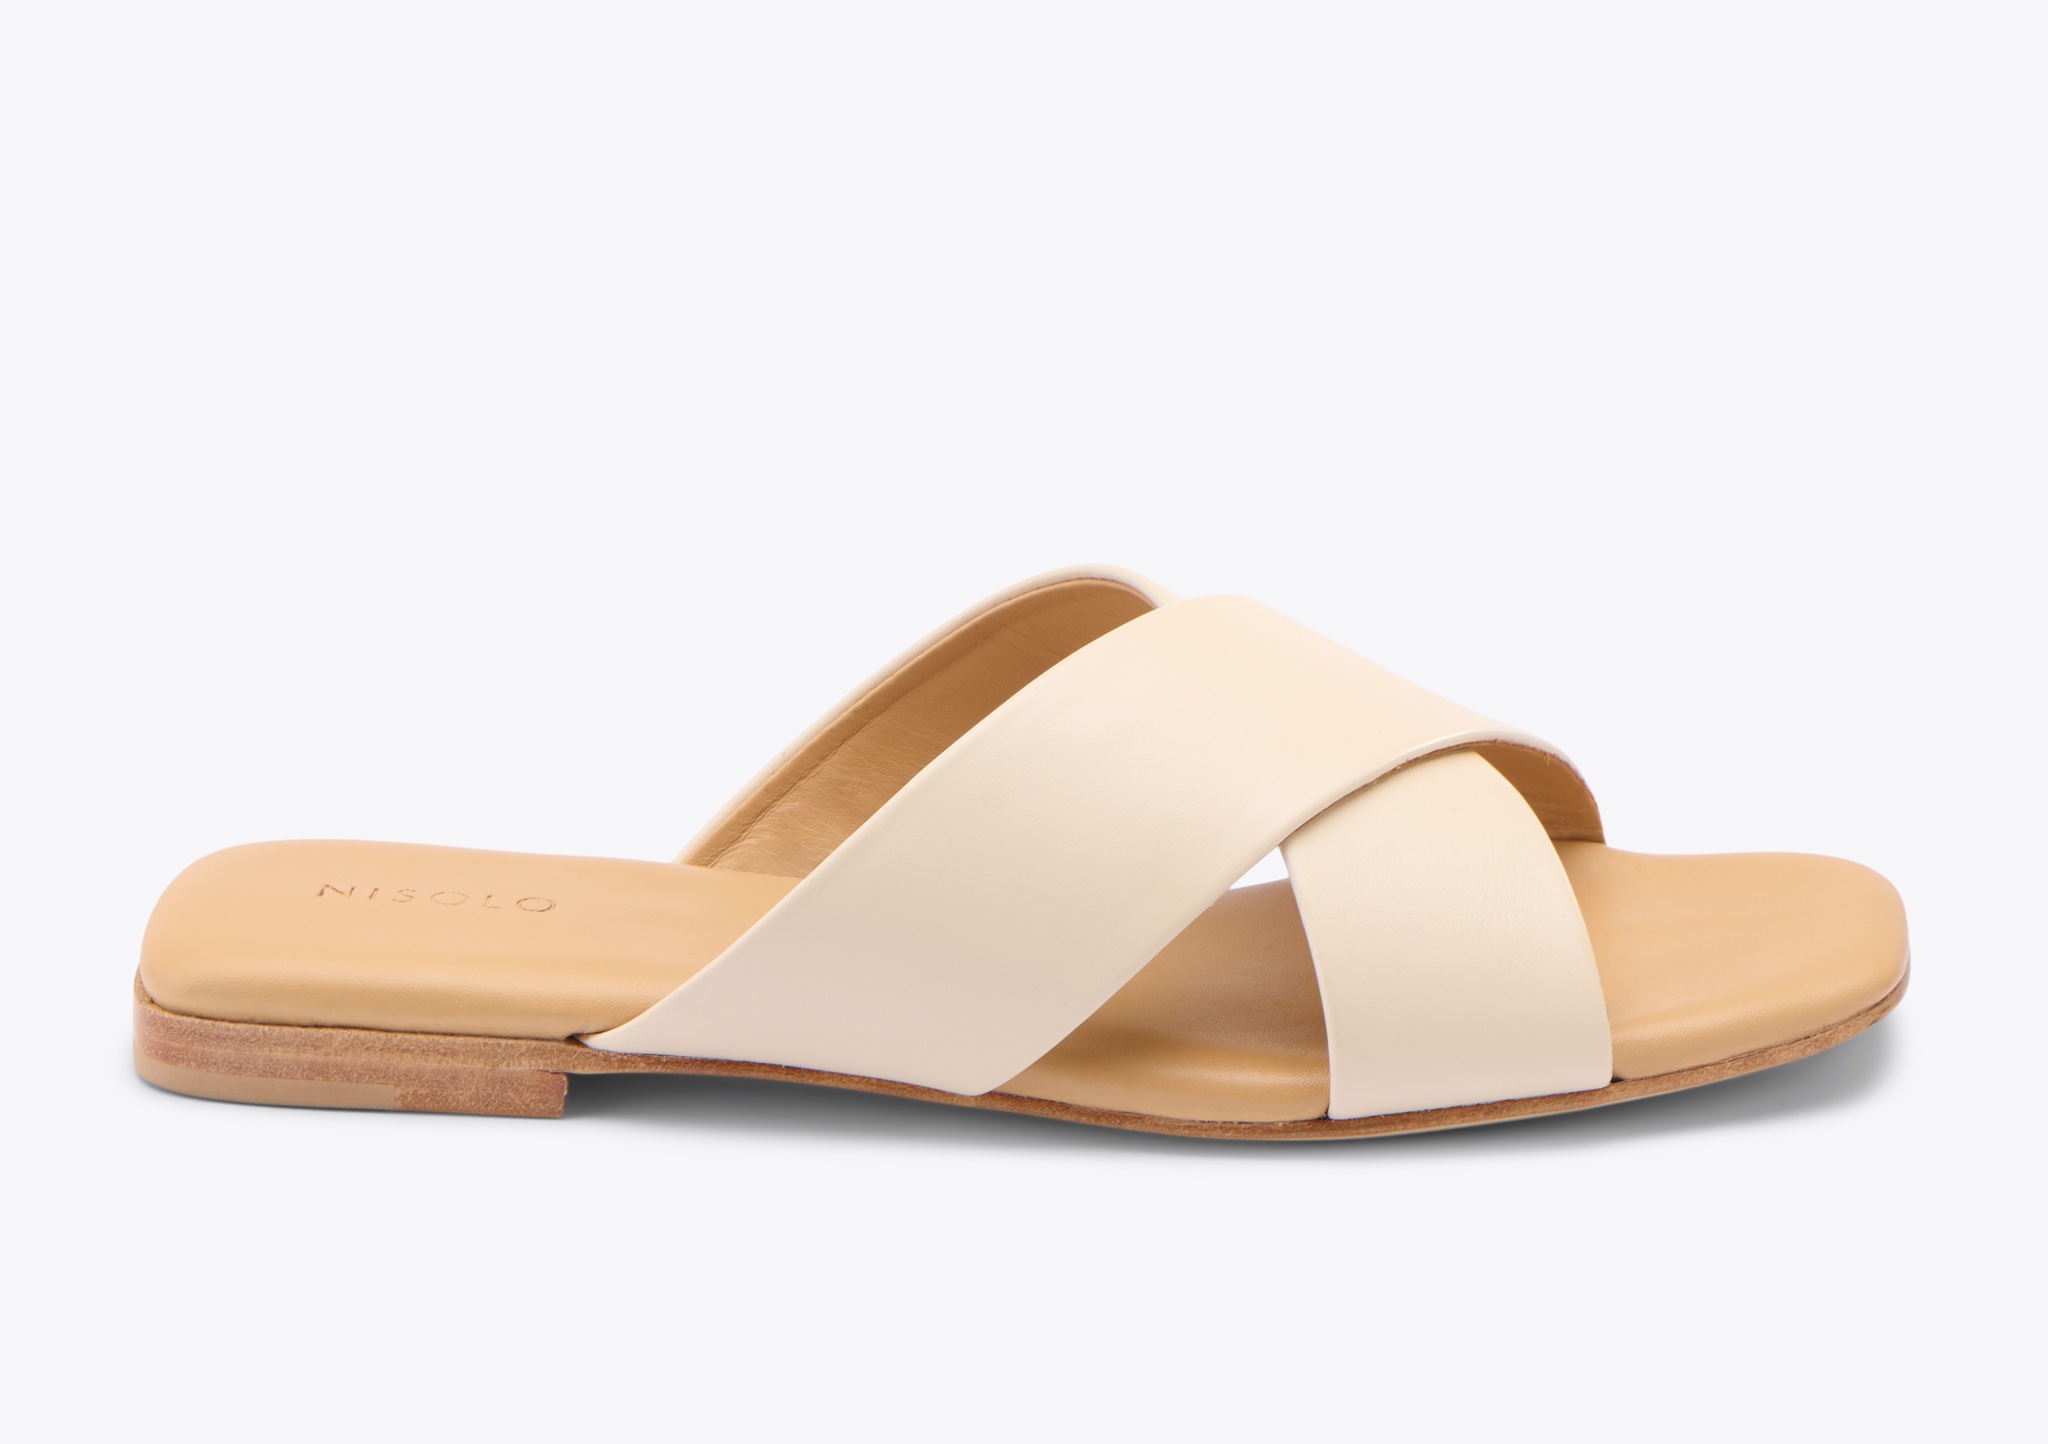 Nisolo Catalina Slide Sandal Bone - Every Nisolo product is built on the foundation of comfort, function, and design. 